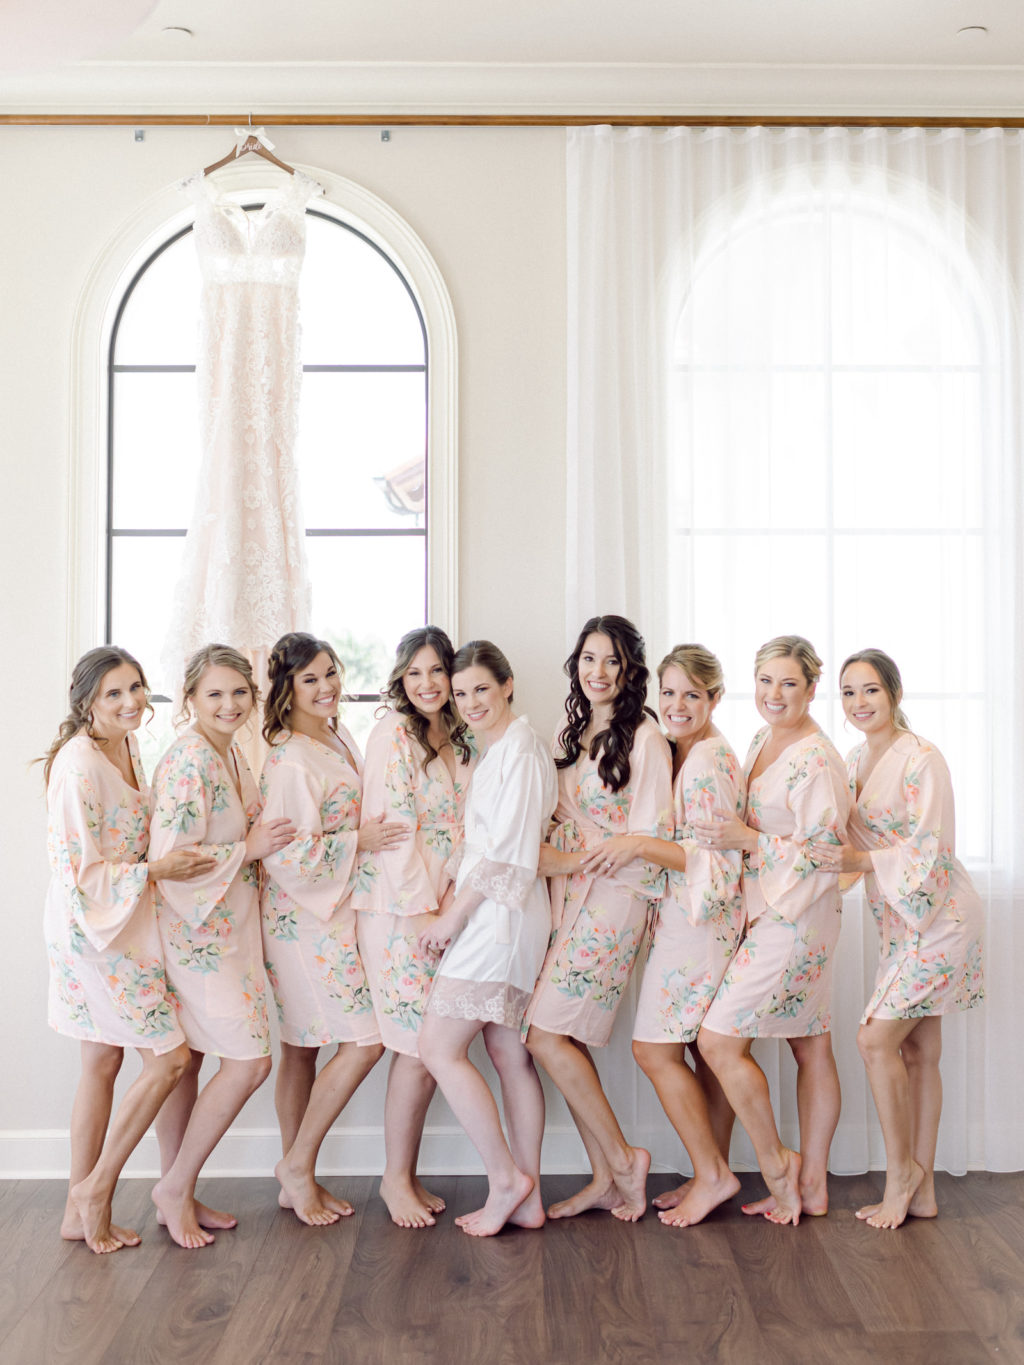 Tampa Bride and Bridesmaids in Blush Pink Floral Matching Robes, Lace and Illusion Wedding Dress Hanging in Window | Wedding Hair and Makeup Artist Femme Akoi